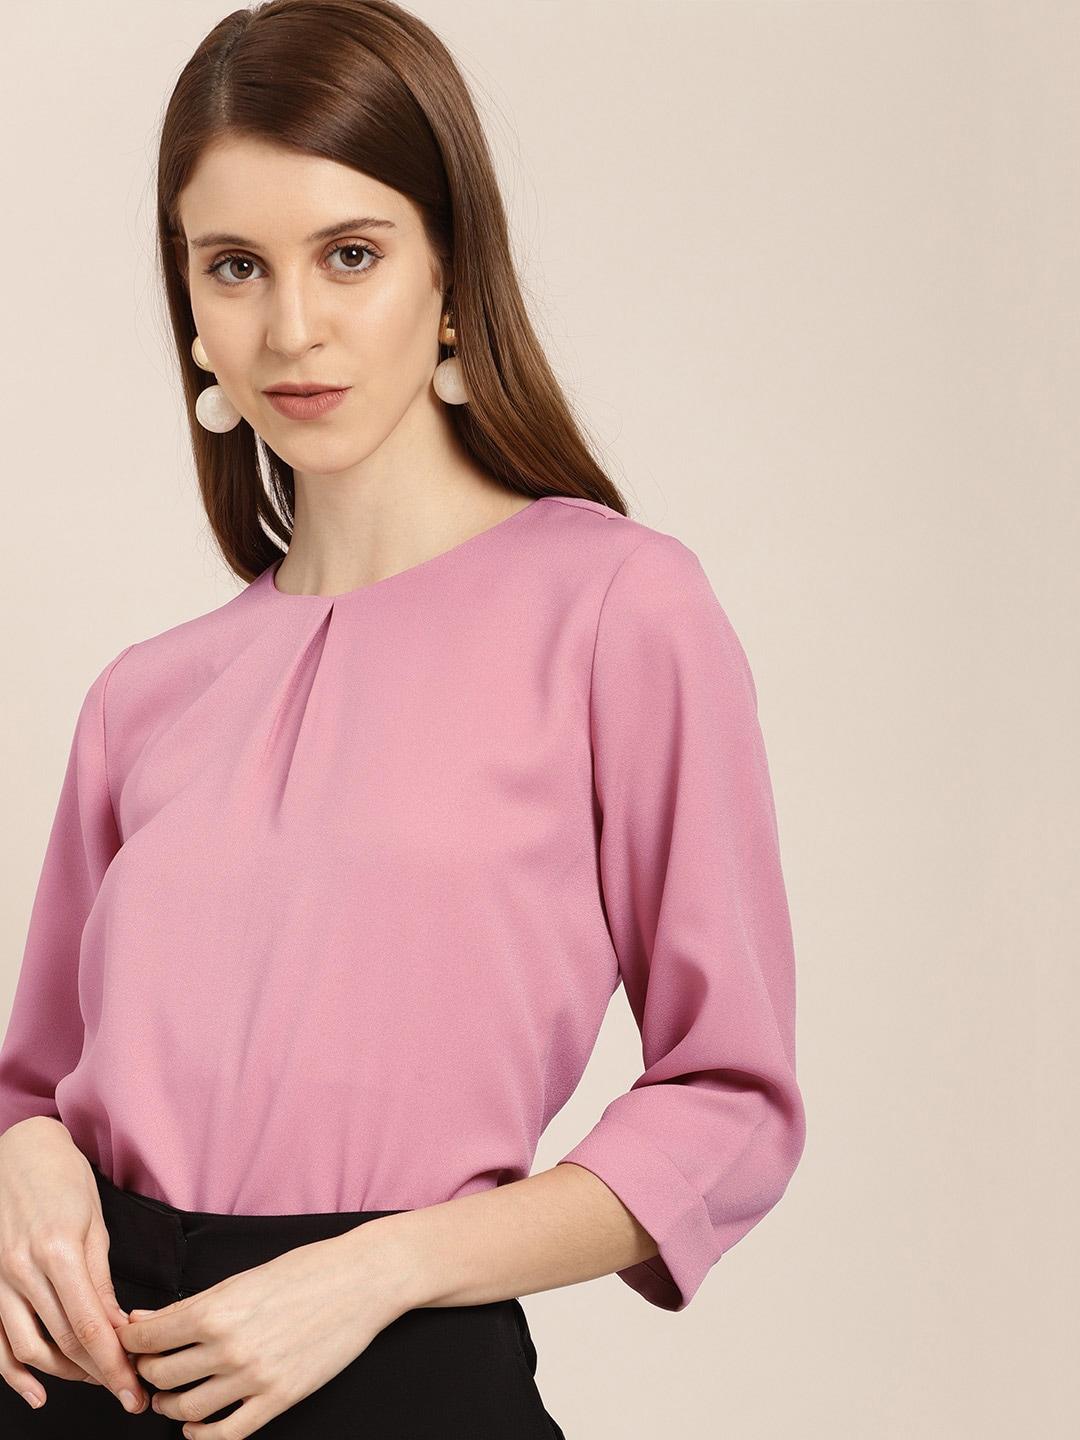 her-by-invictus-mauve-top-with-pleated-detail